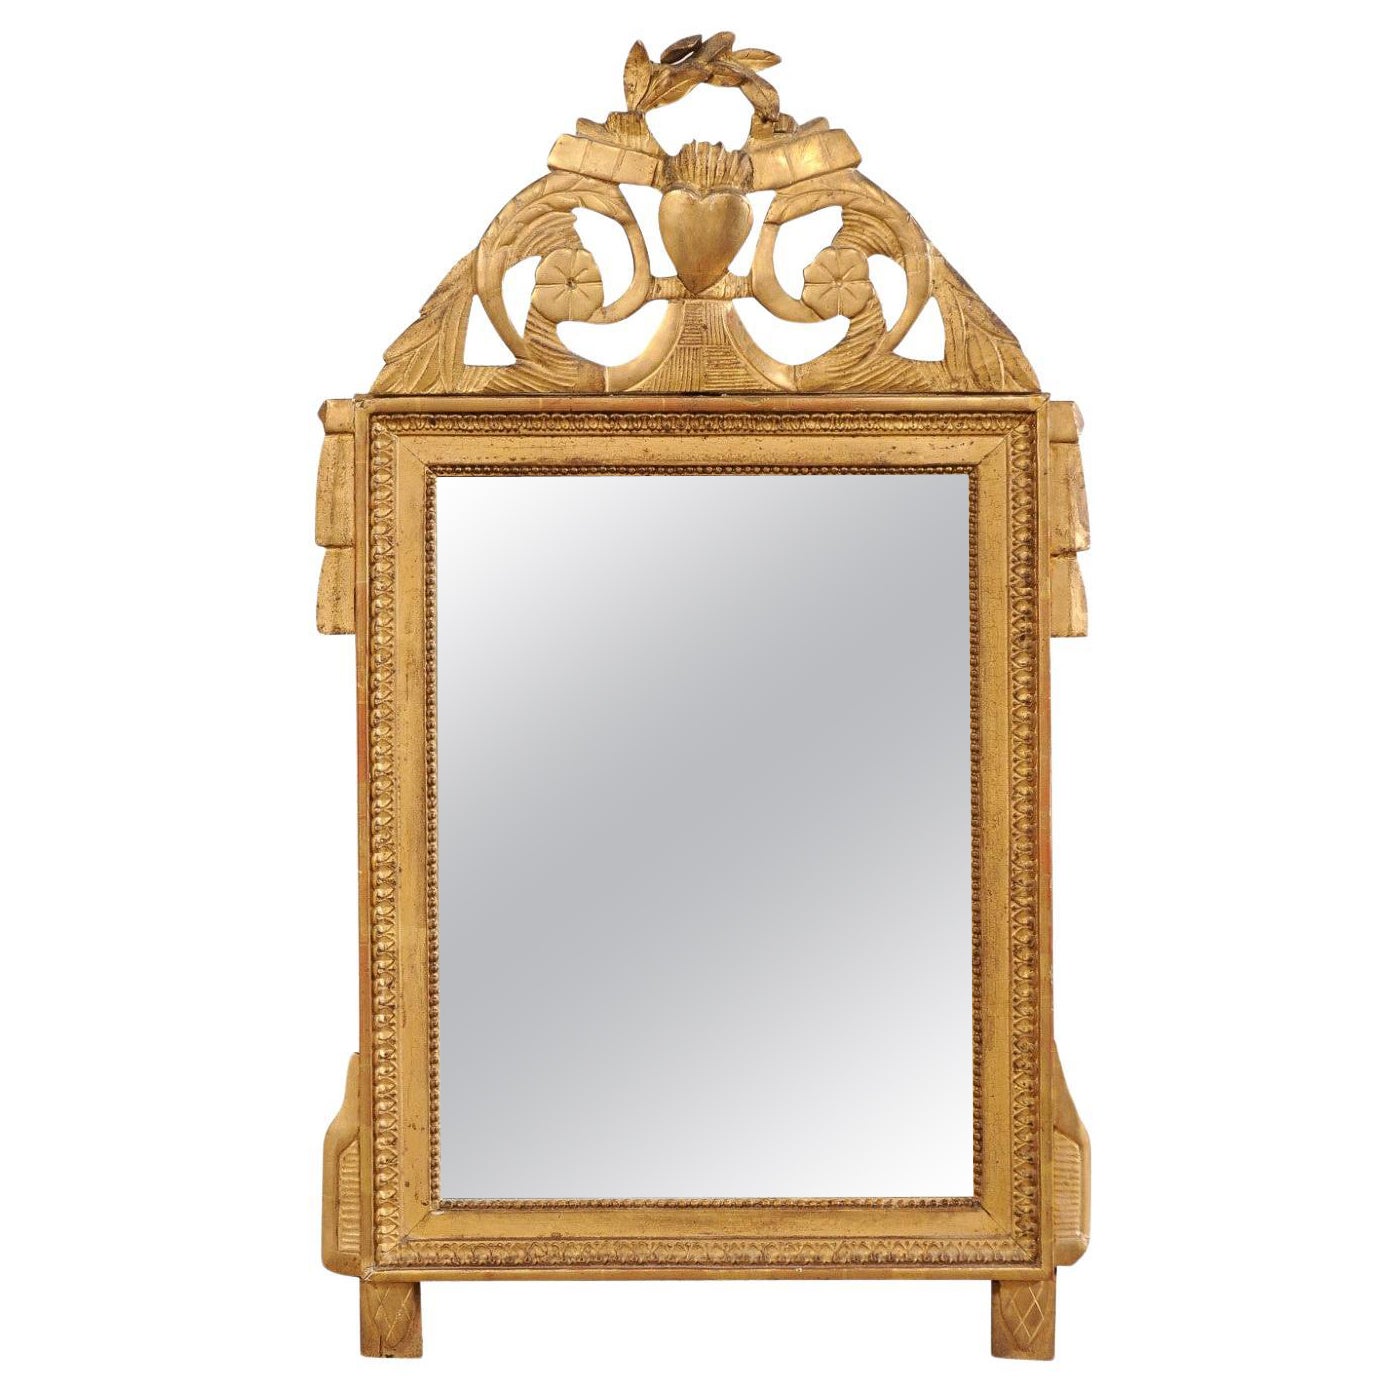 French 19th C. Carved & Gilt Decorative Wall Mirror w/Exaggerated Crest